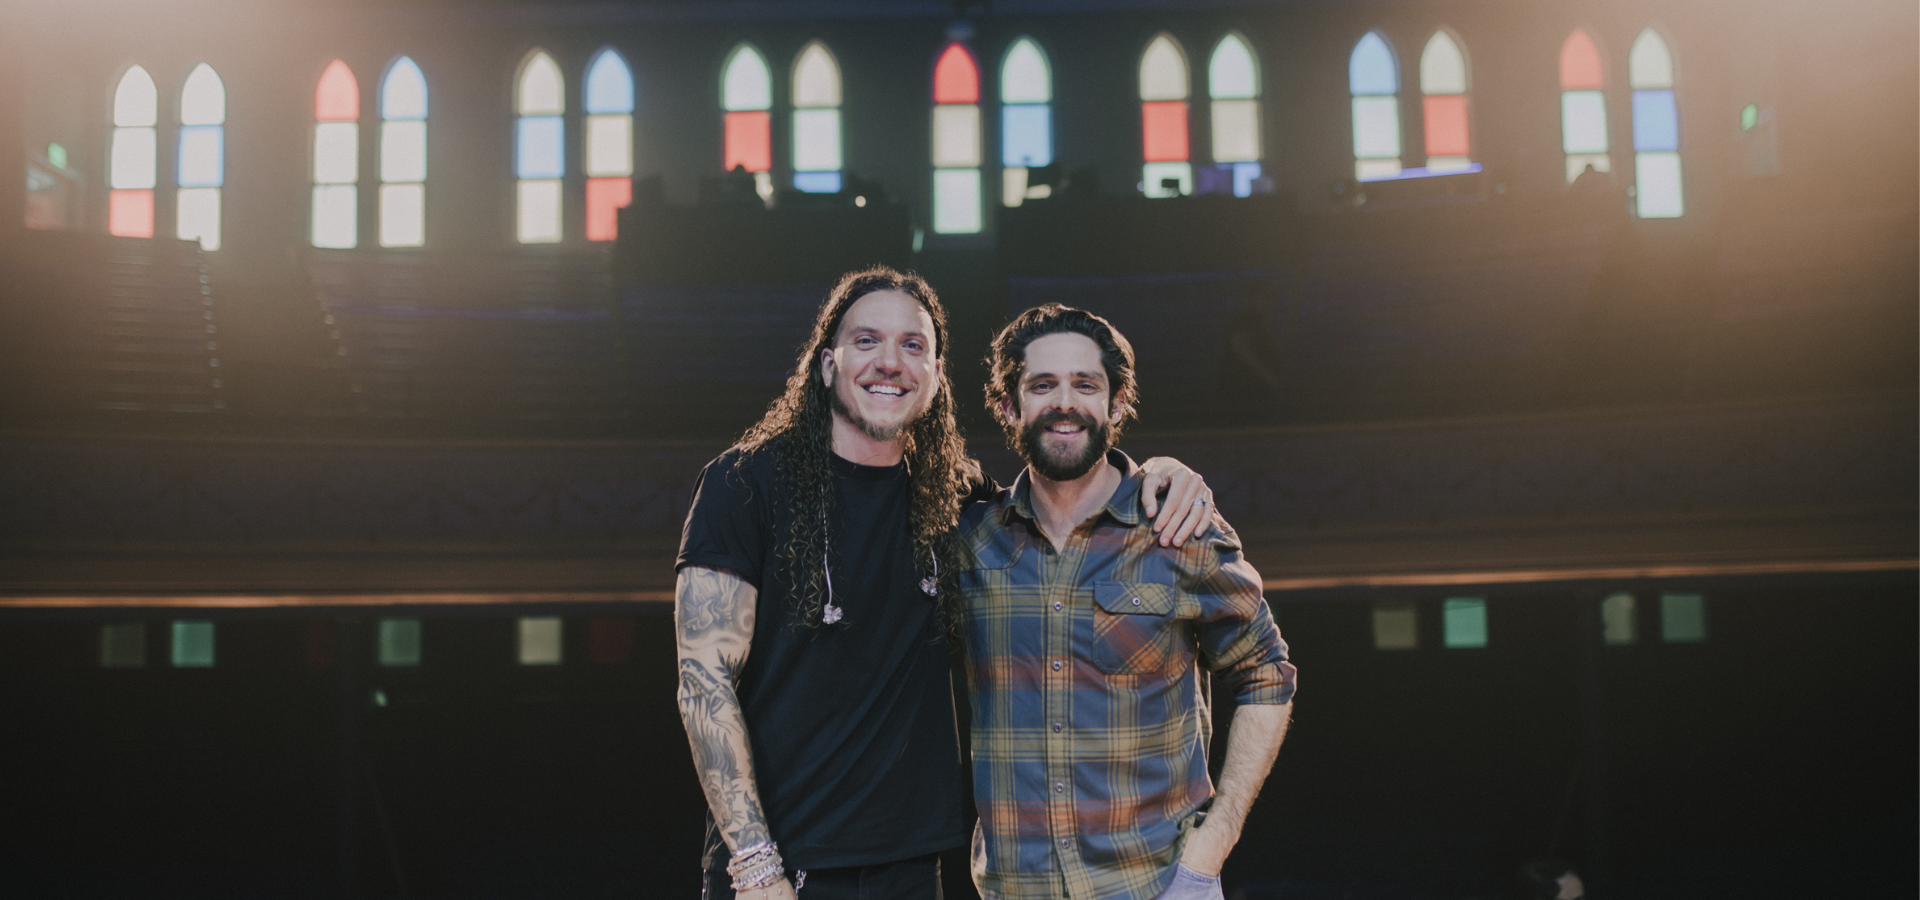 Brandon Lake And Thomas Rhett Team Up For Powerful Rendition of “Talking To Jesus” Live From The Historic Ryman Auditorium